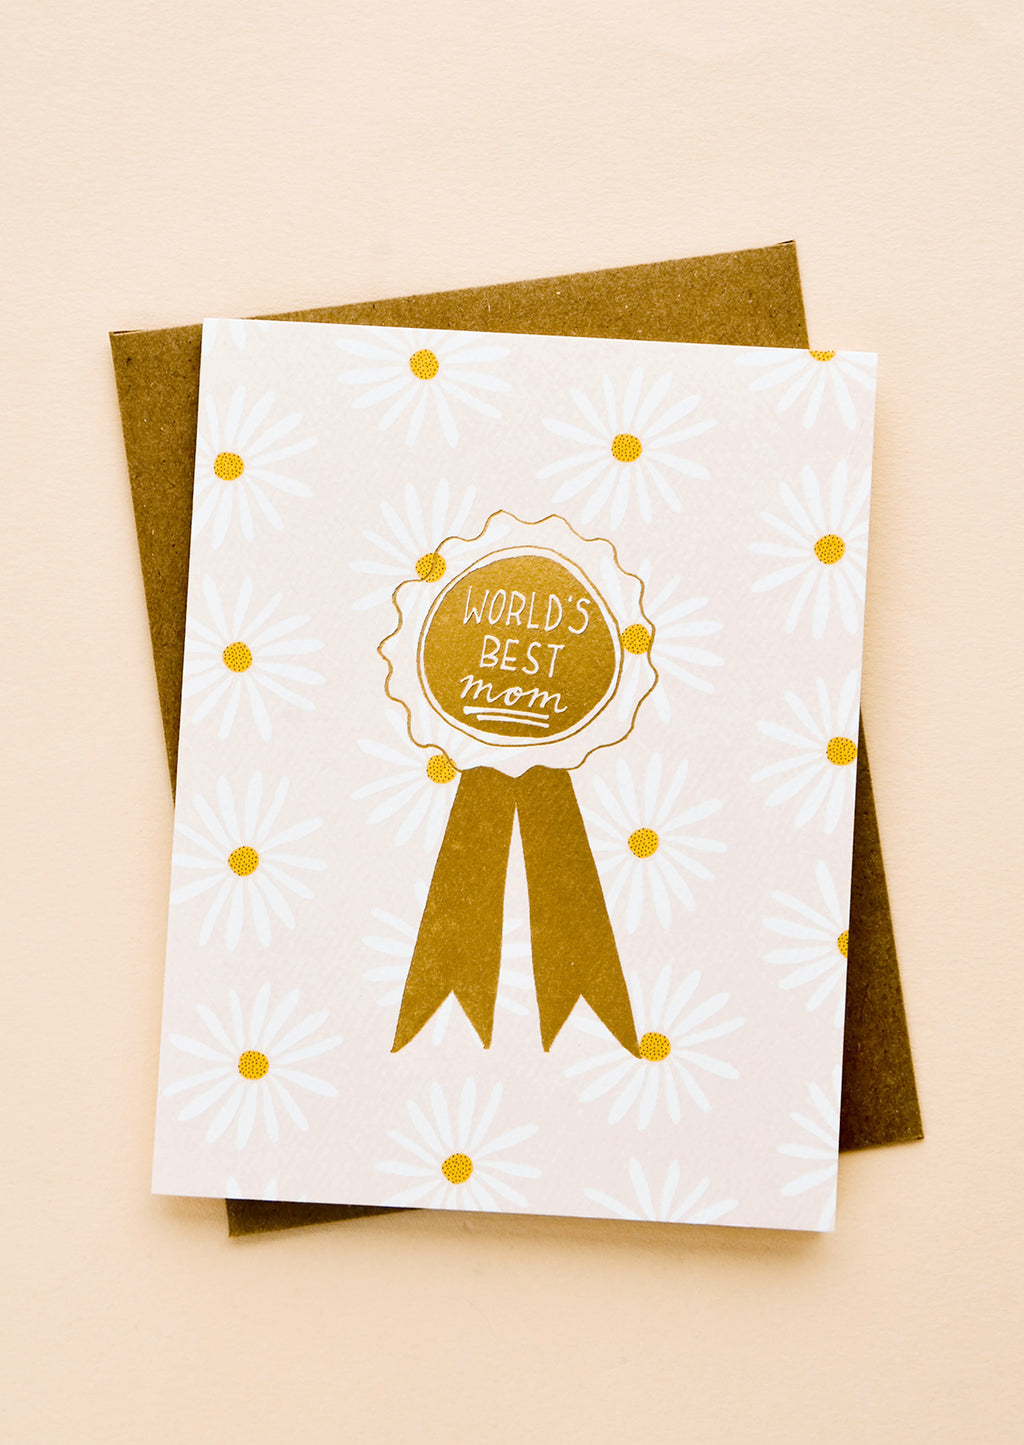 2: Greeting card with allover daisy pattern and gold ribbon reading "World's Best Mom" 